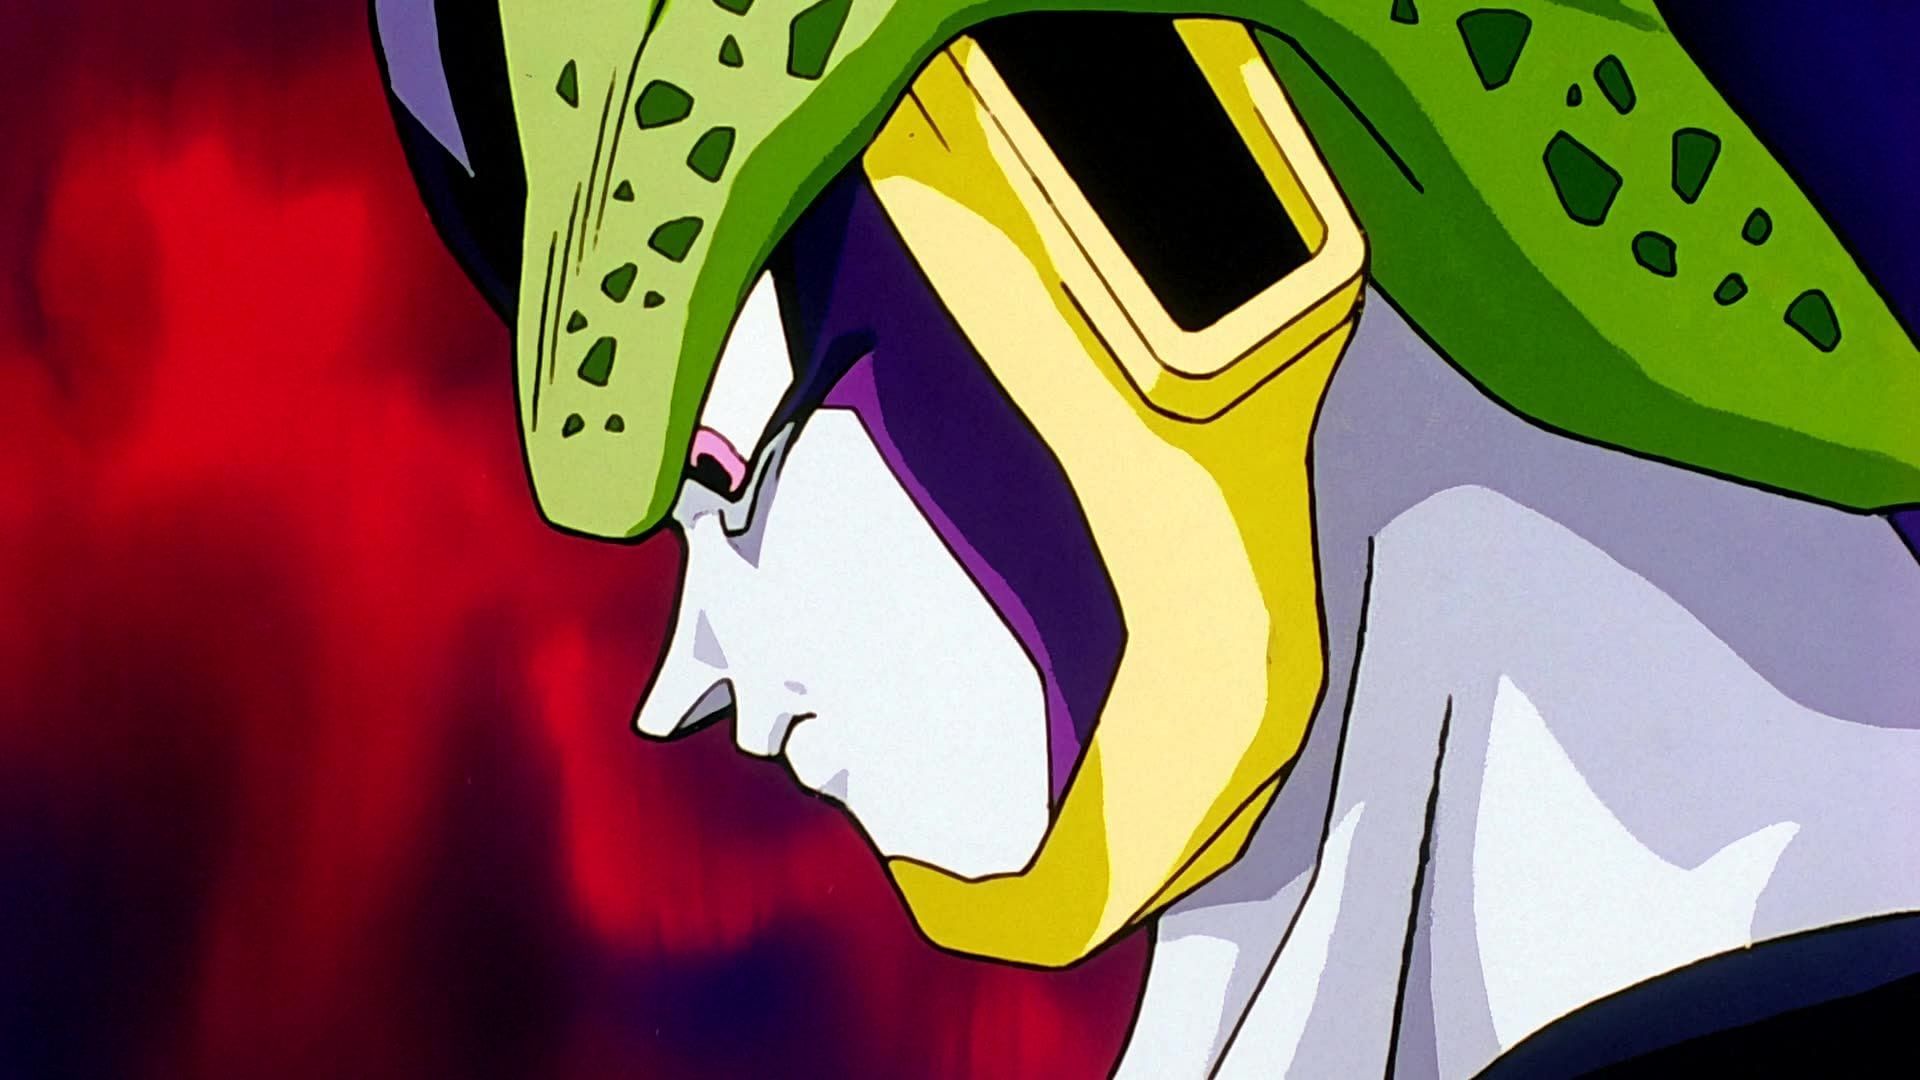 Cell as seen in the show (Image via Toei Animation)